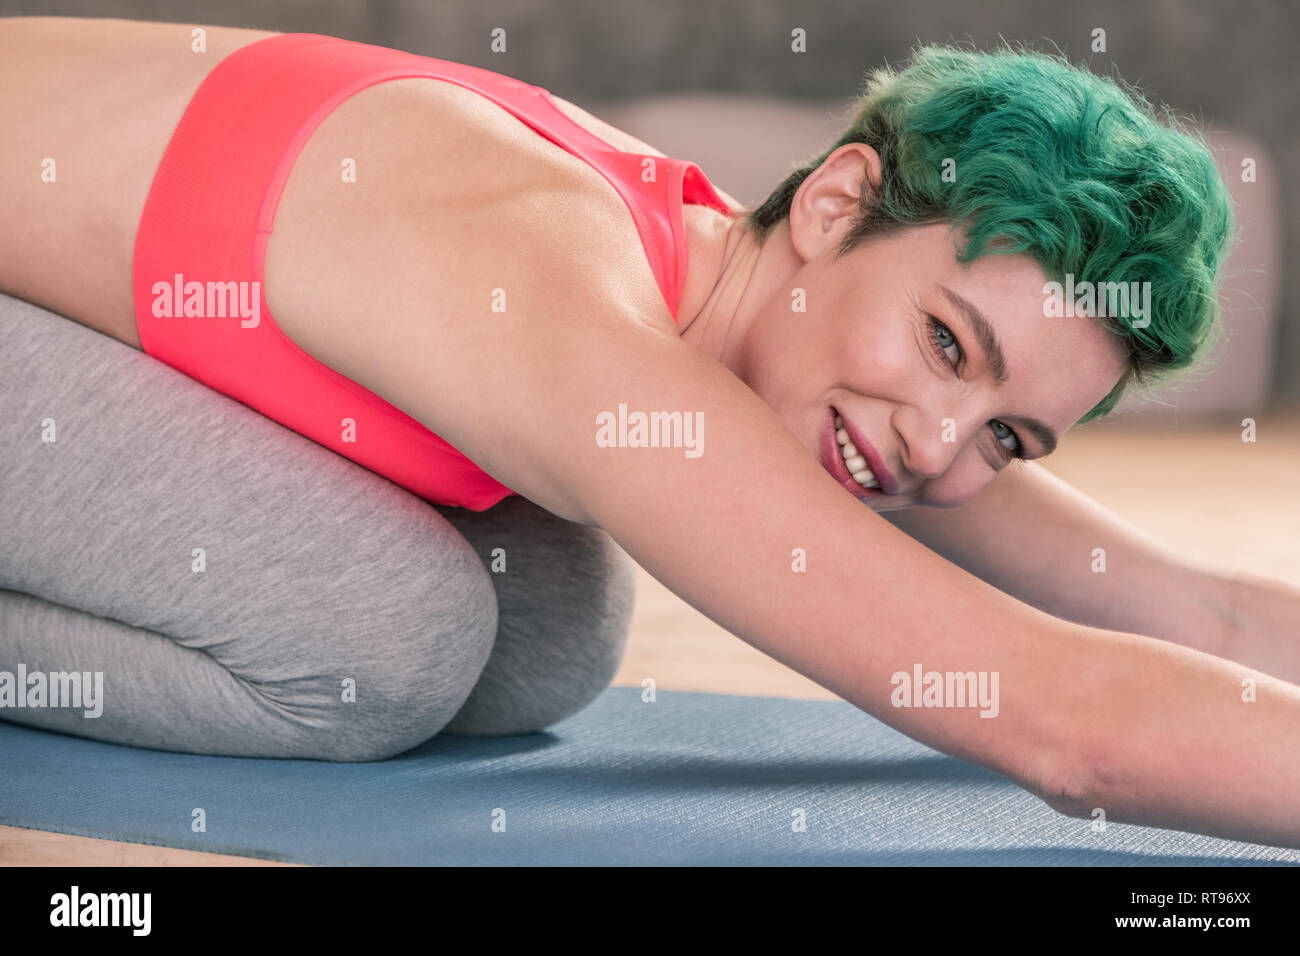 Appealing green-eyed woman smiling while stretching after gym Stock Photo